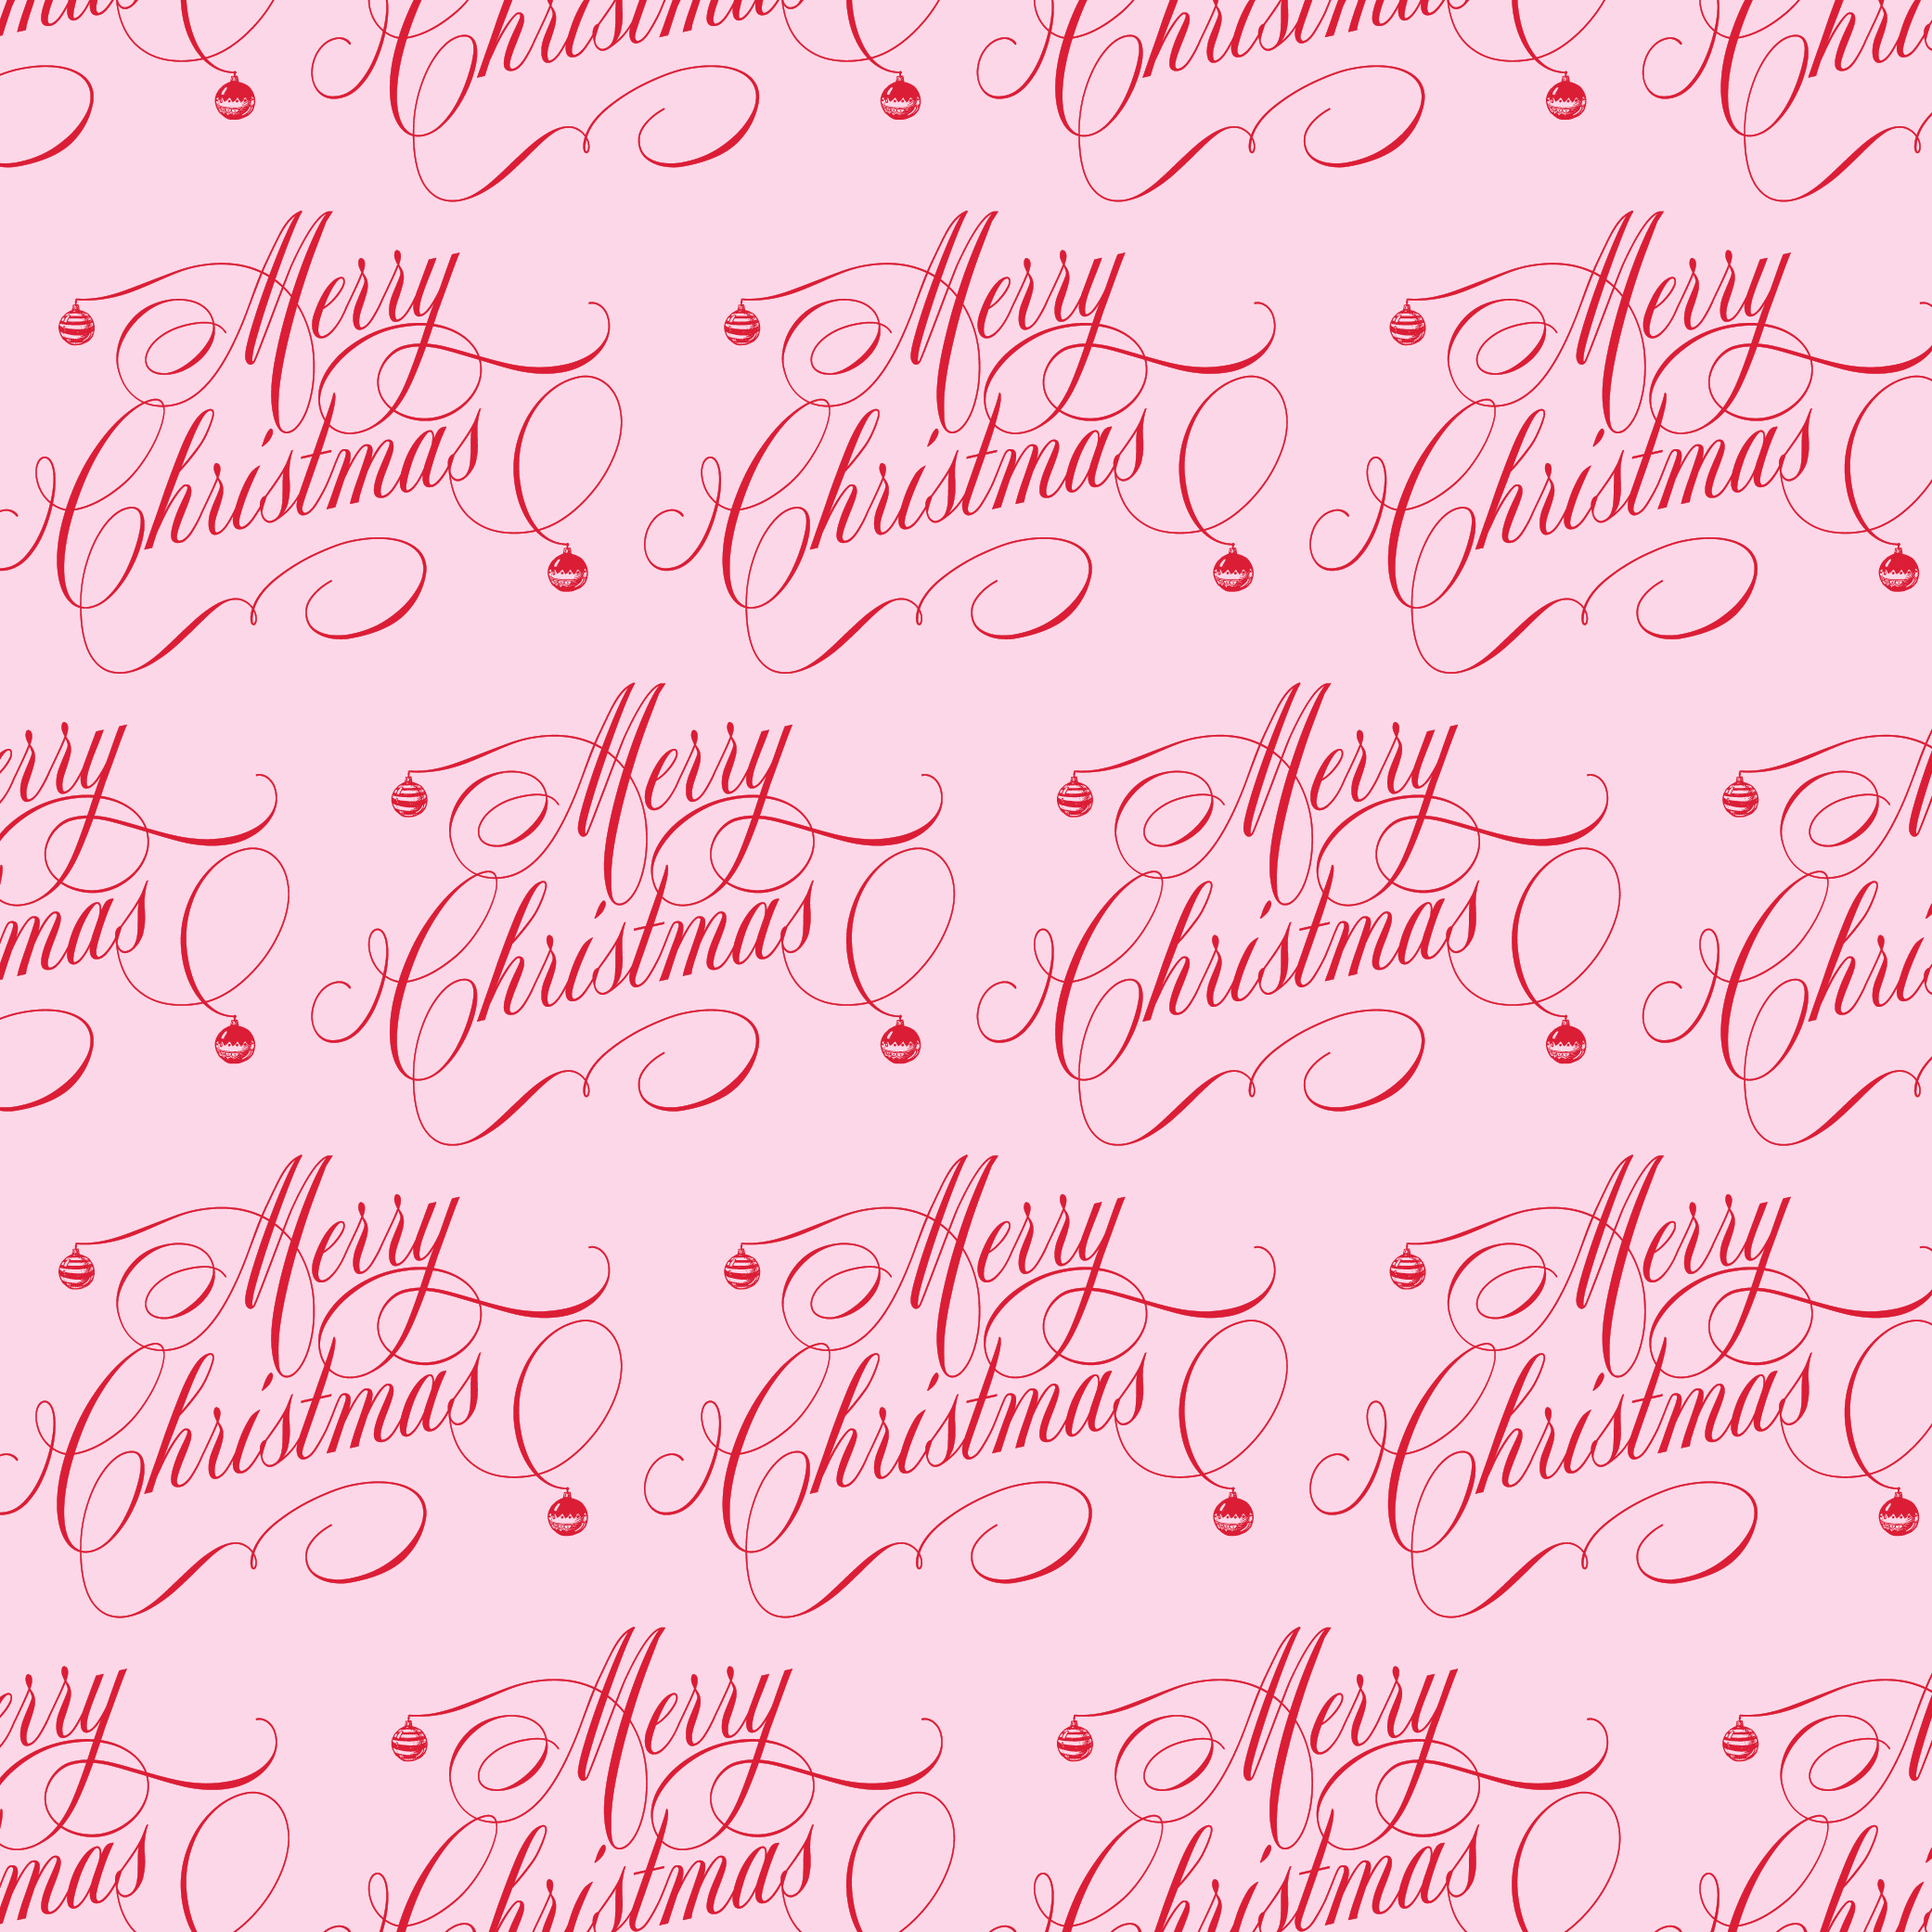 Hot Pink Wrapping Paper Archives - Abigail Christine Design